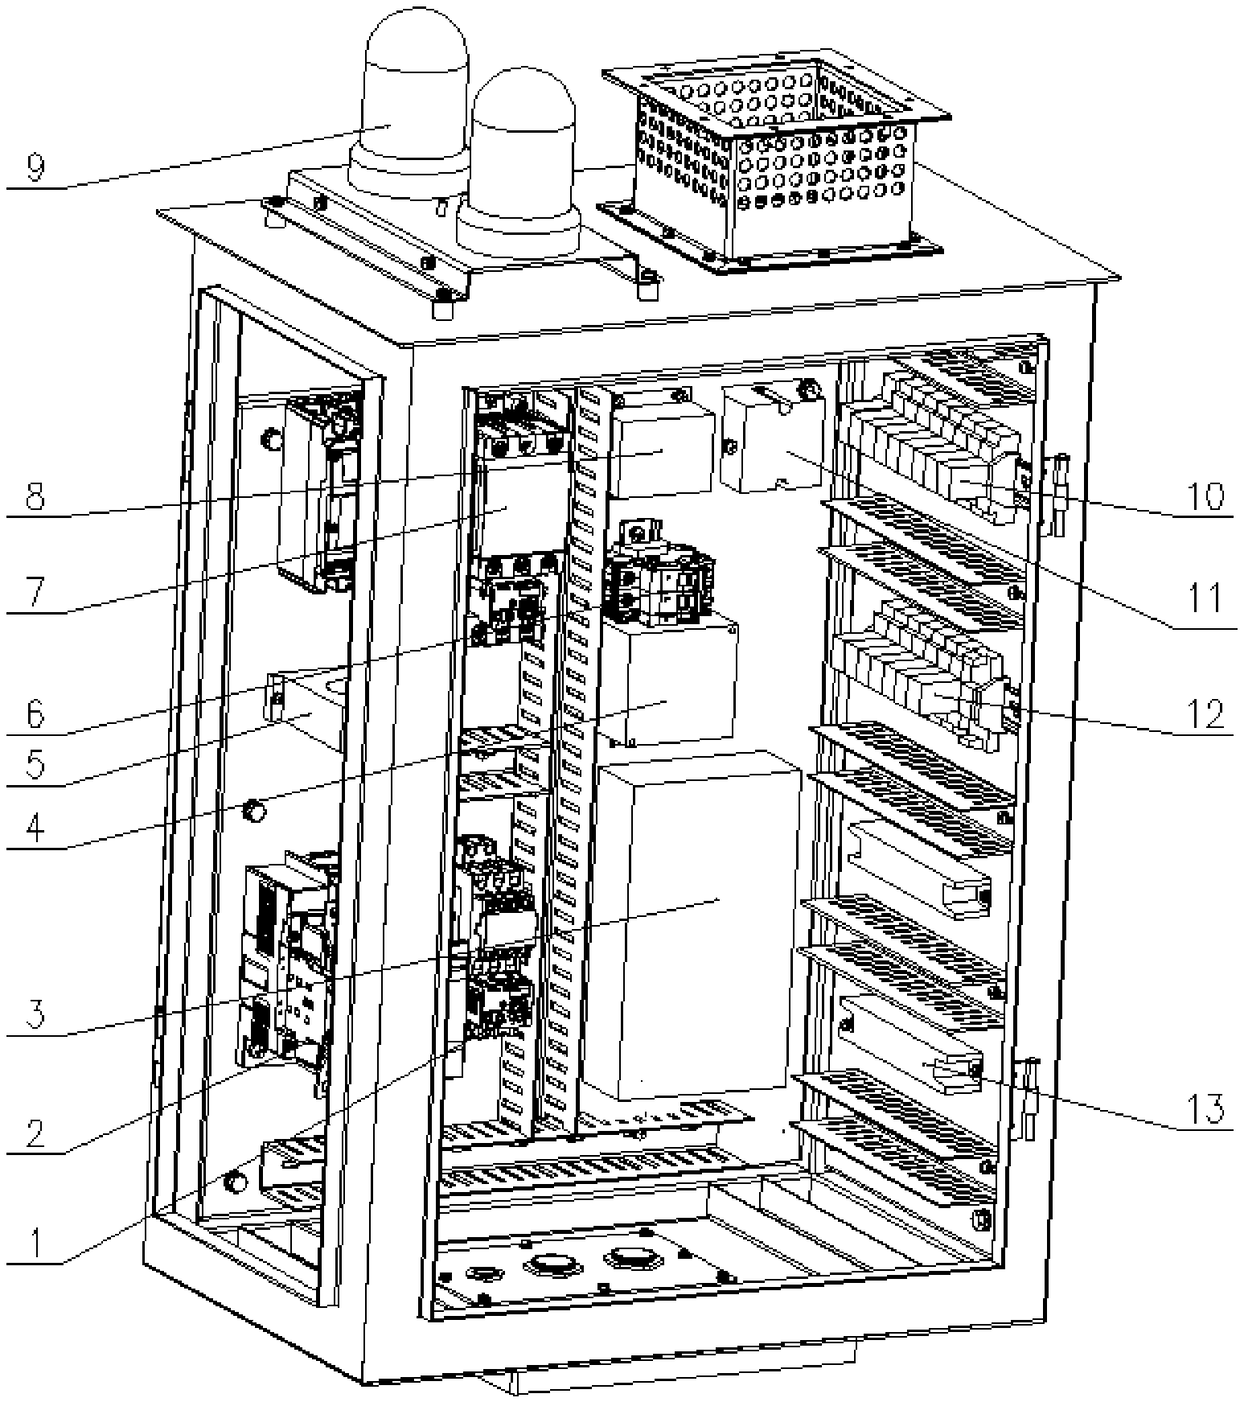 Power distribution cabinet for electrical engineering machinery